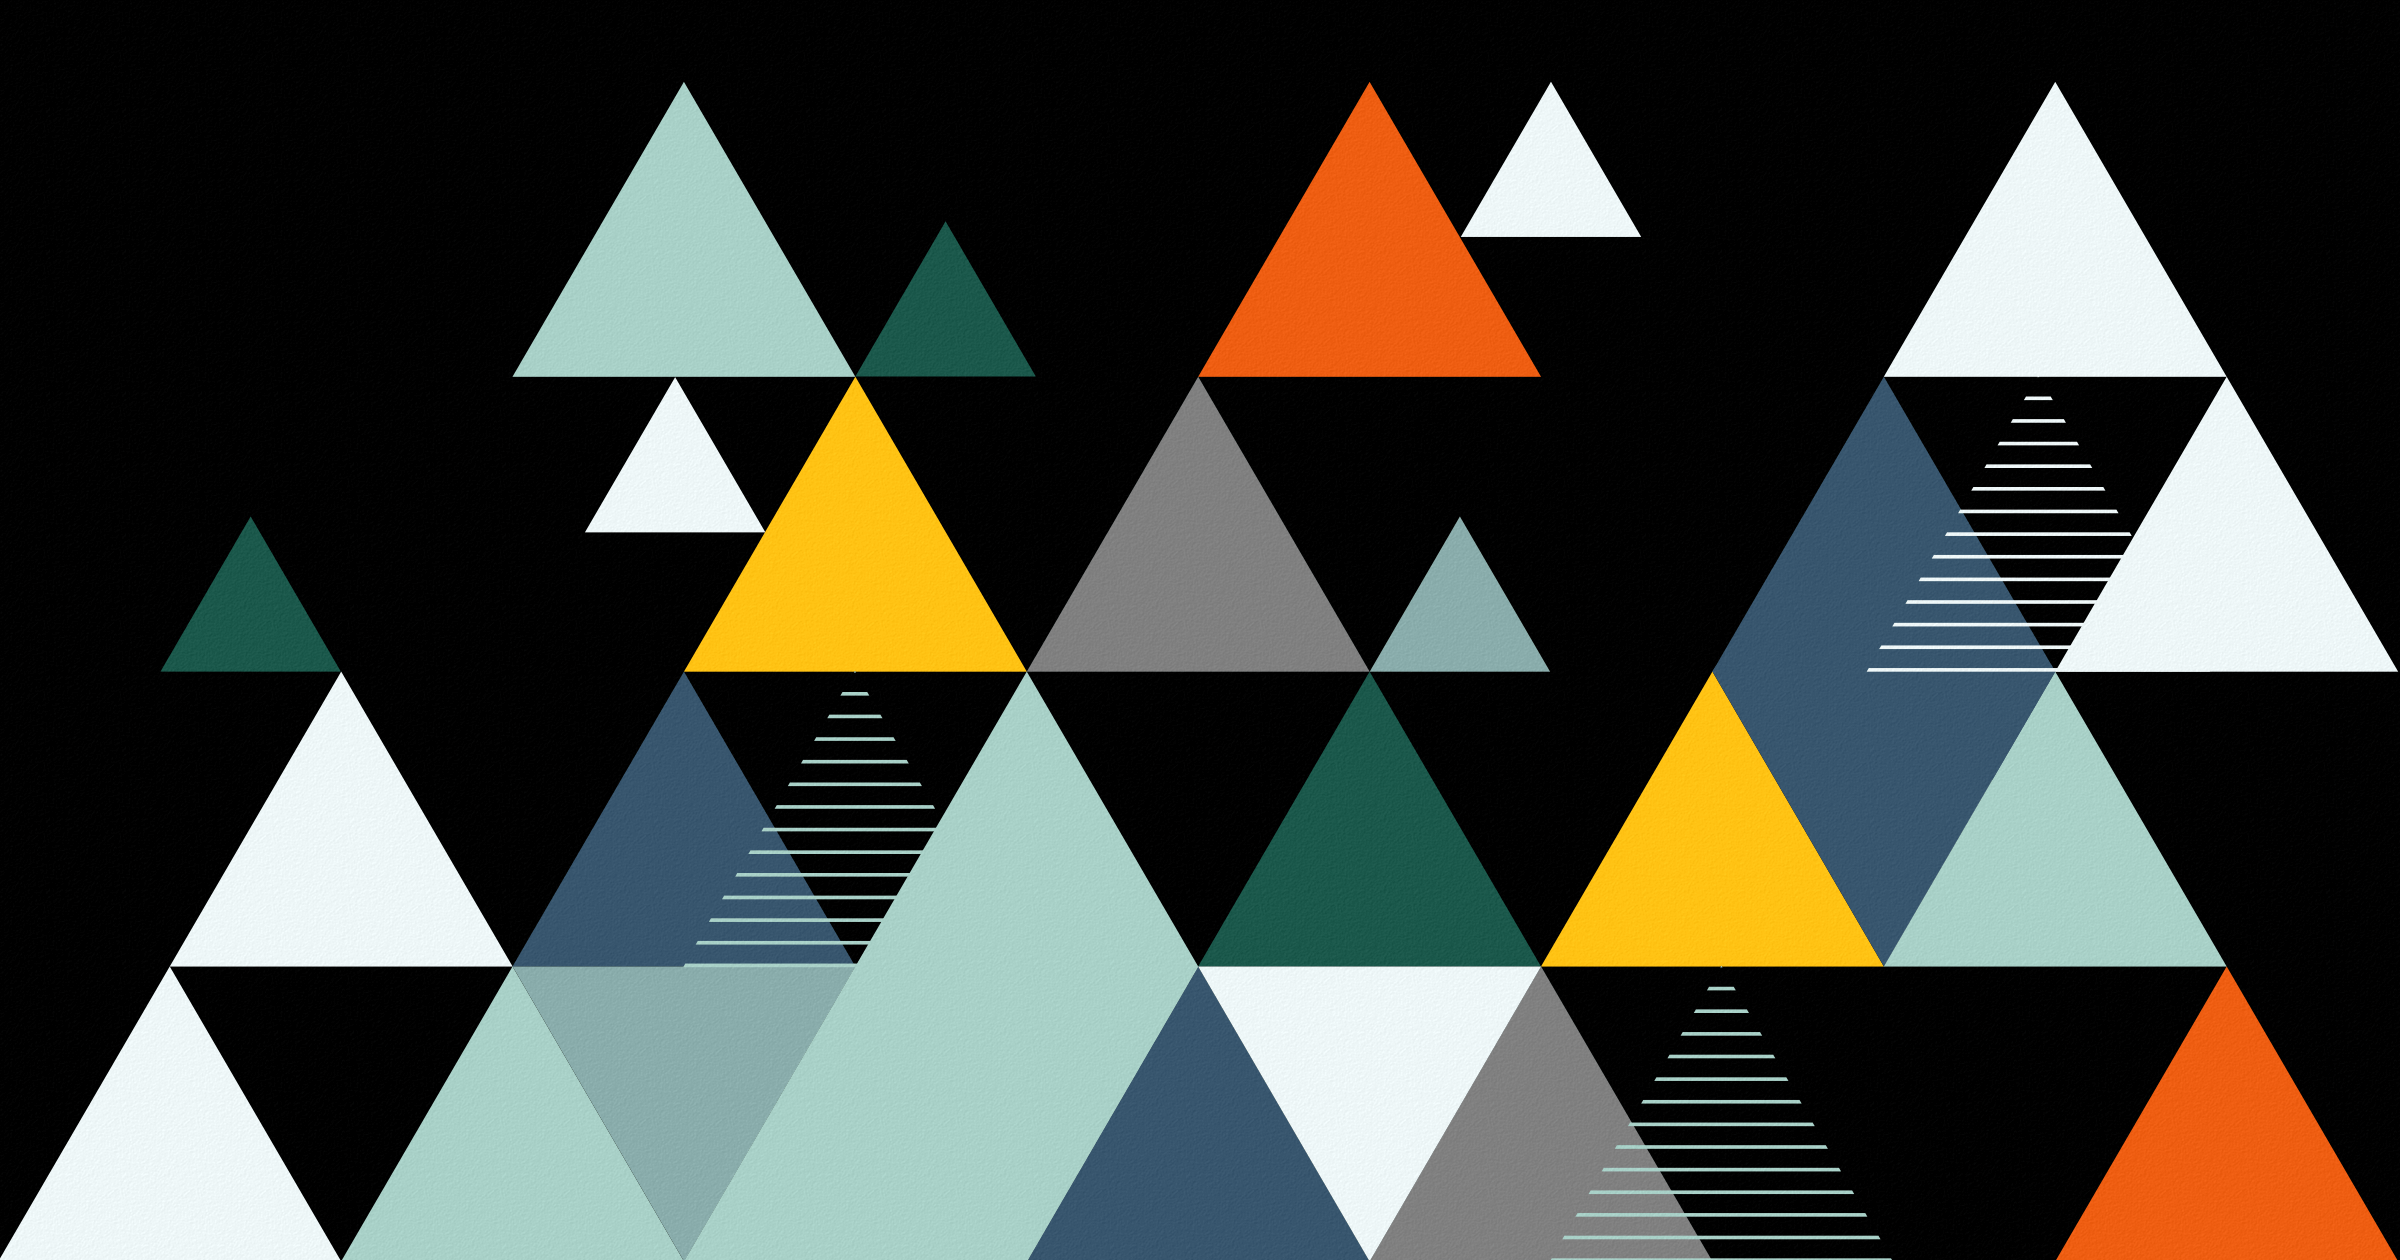 A collage of multi-colored trianges (gray, orange, white, black, blue, and green) against a black background.